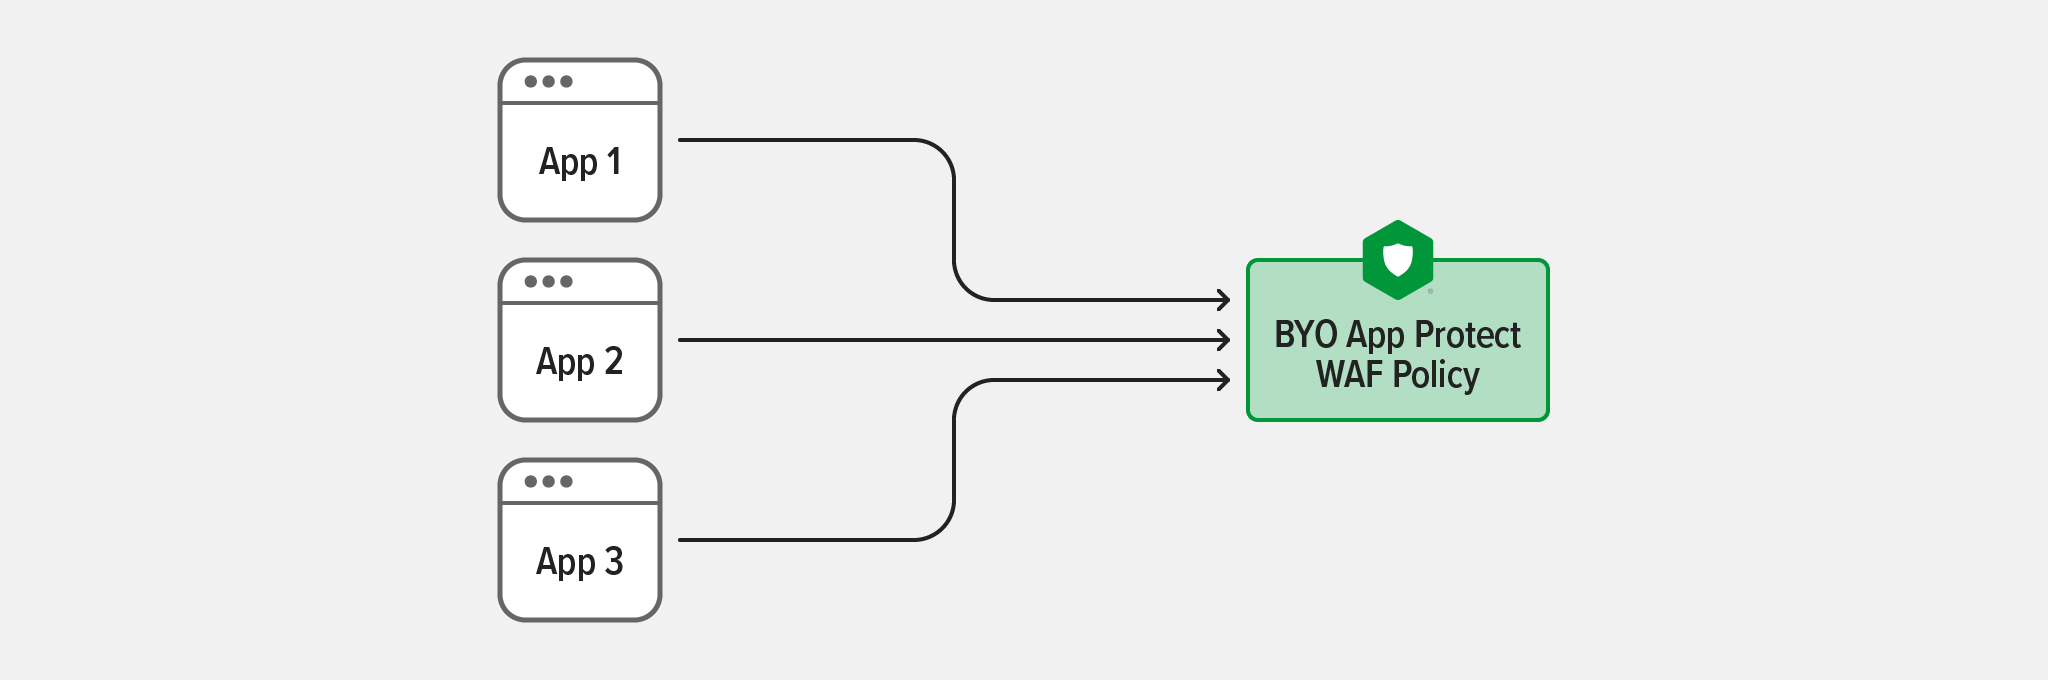 Diagram showing how multiple apps can refer to the same BYO App Protect WAF policy